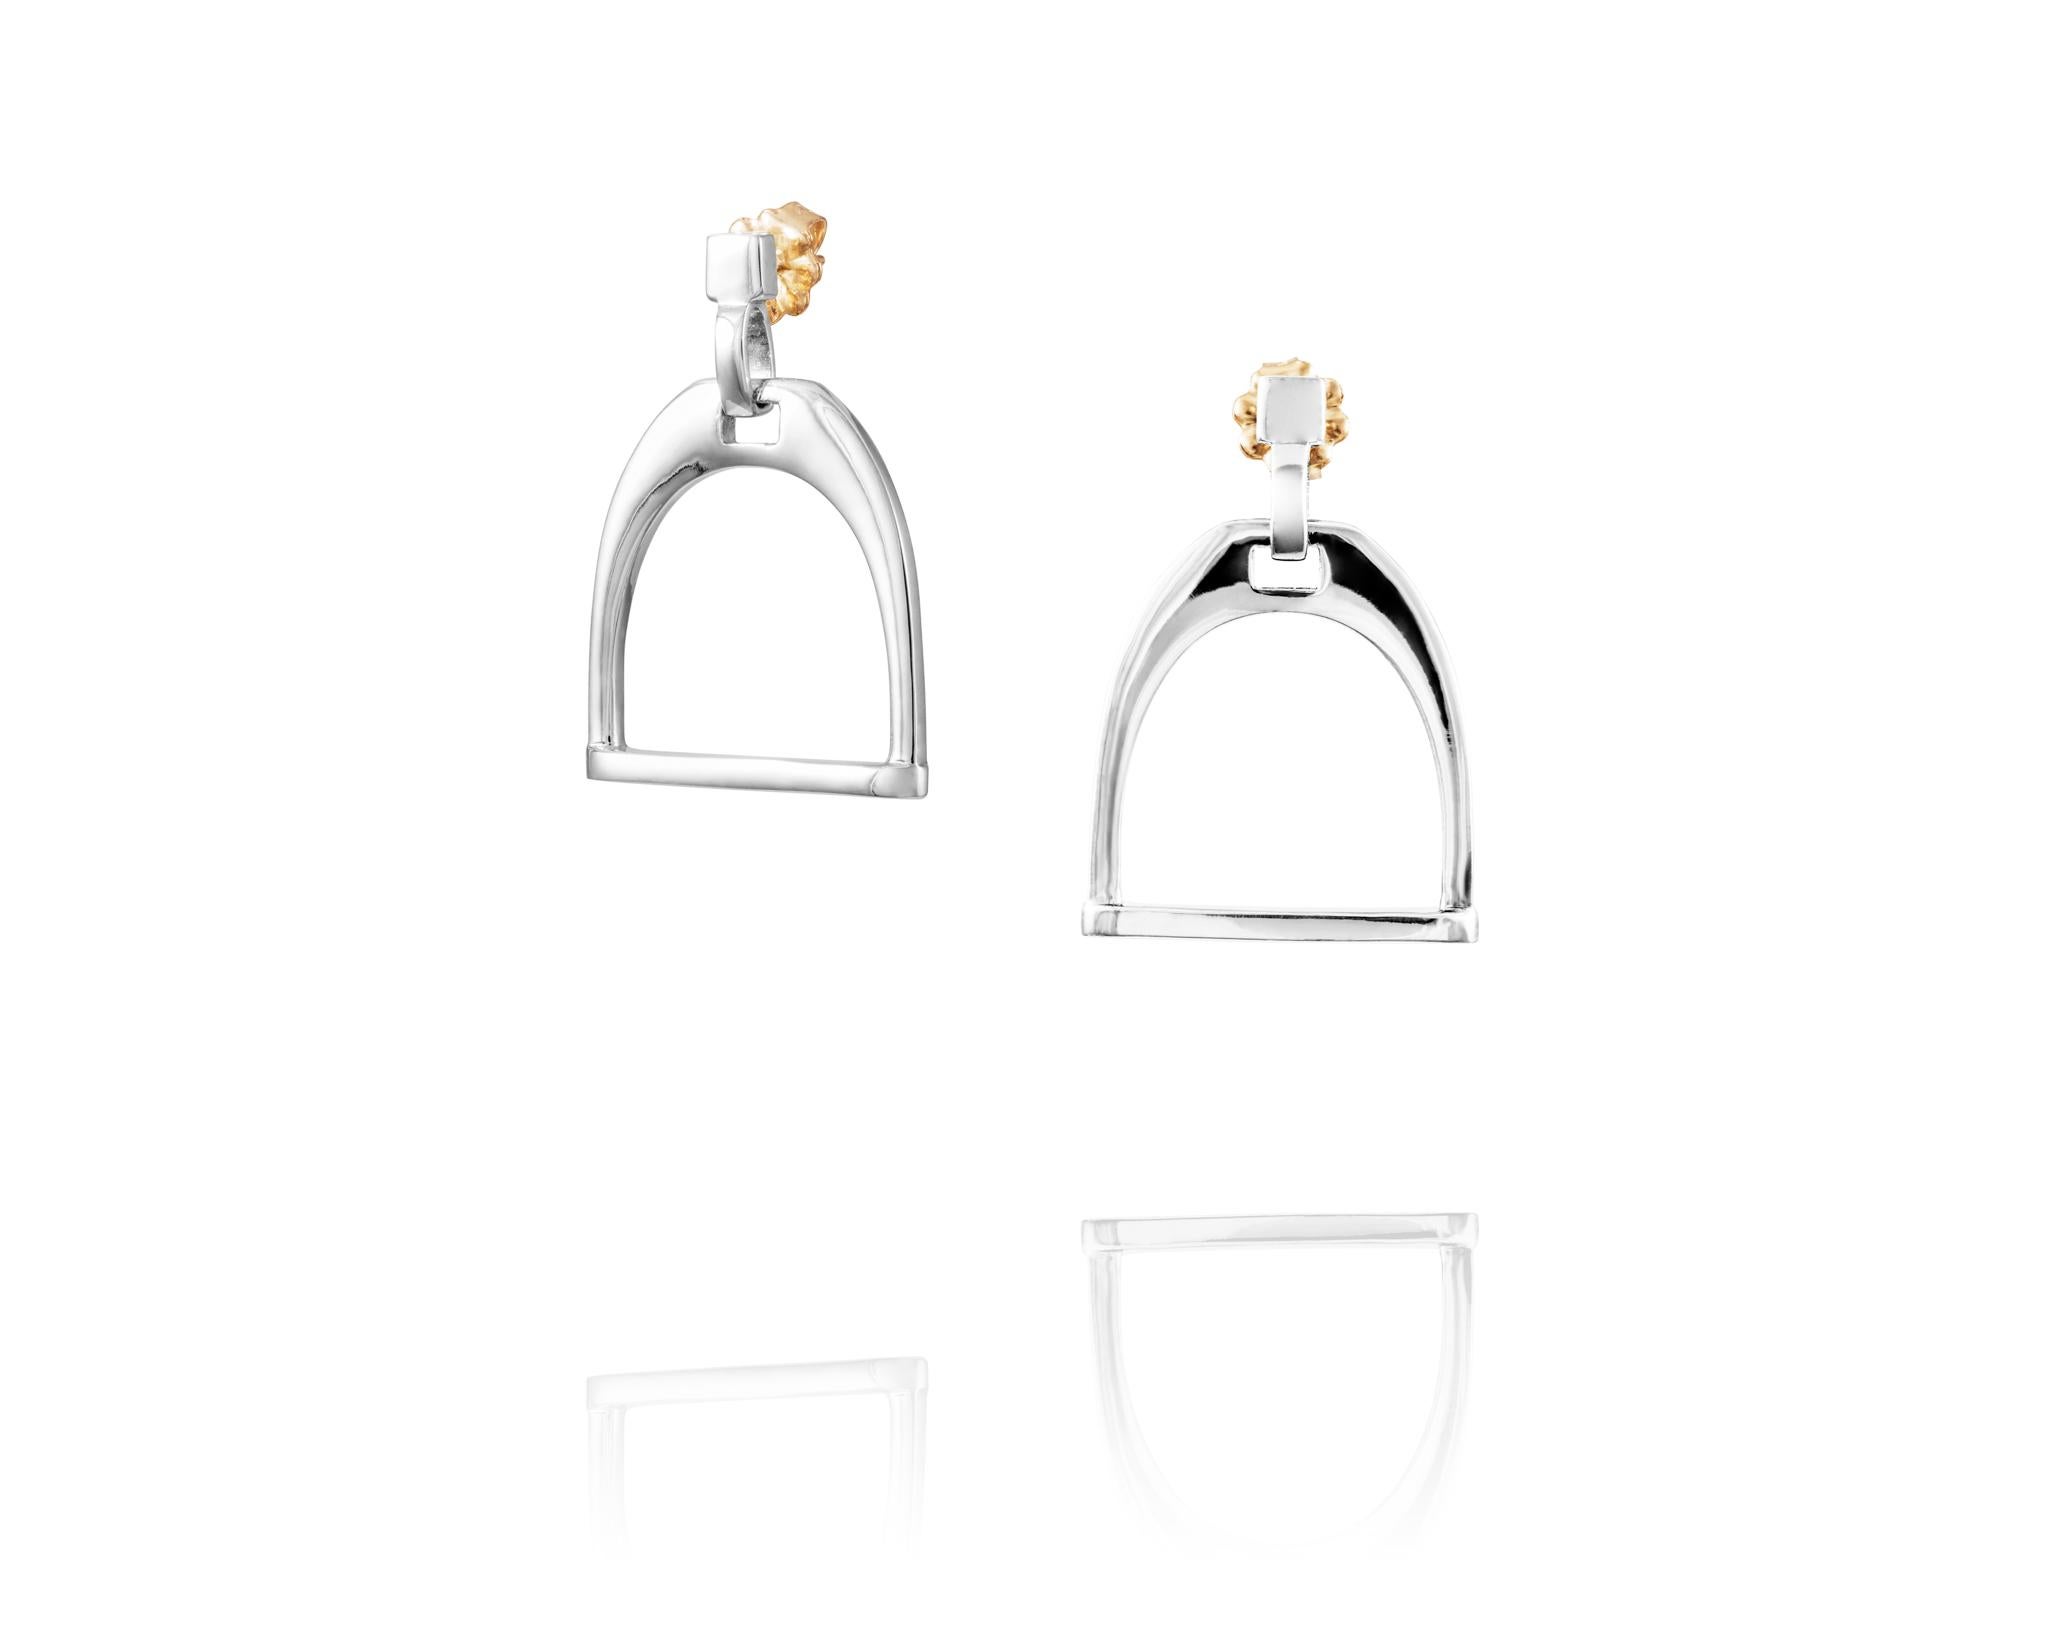 Part of the Vincent Peach Equestrian Collection, the Stirrup Earrings are 1.5